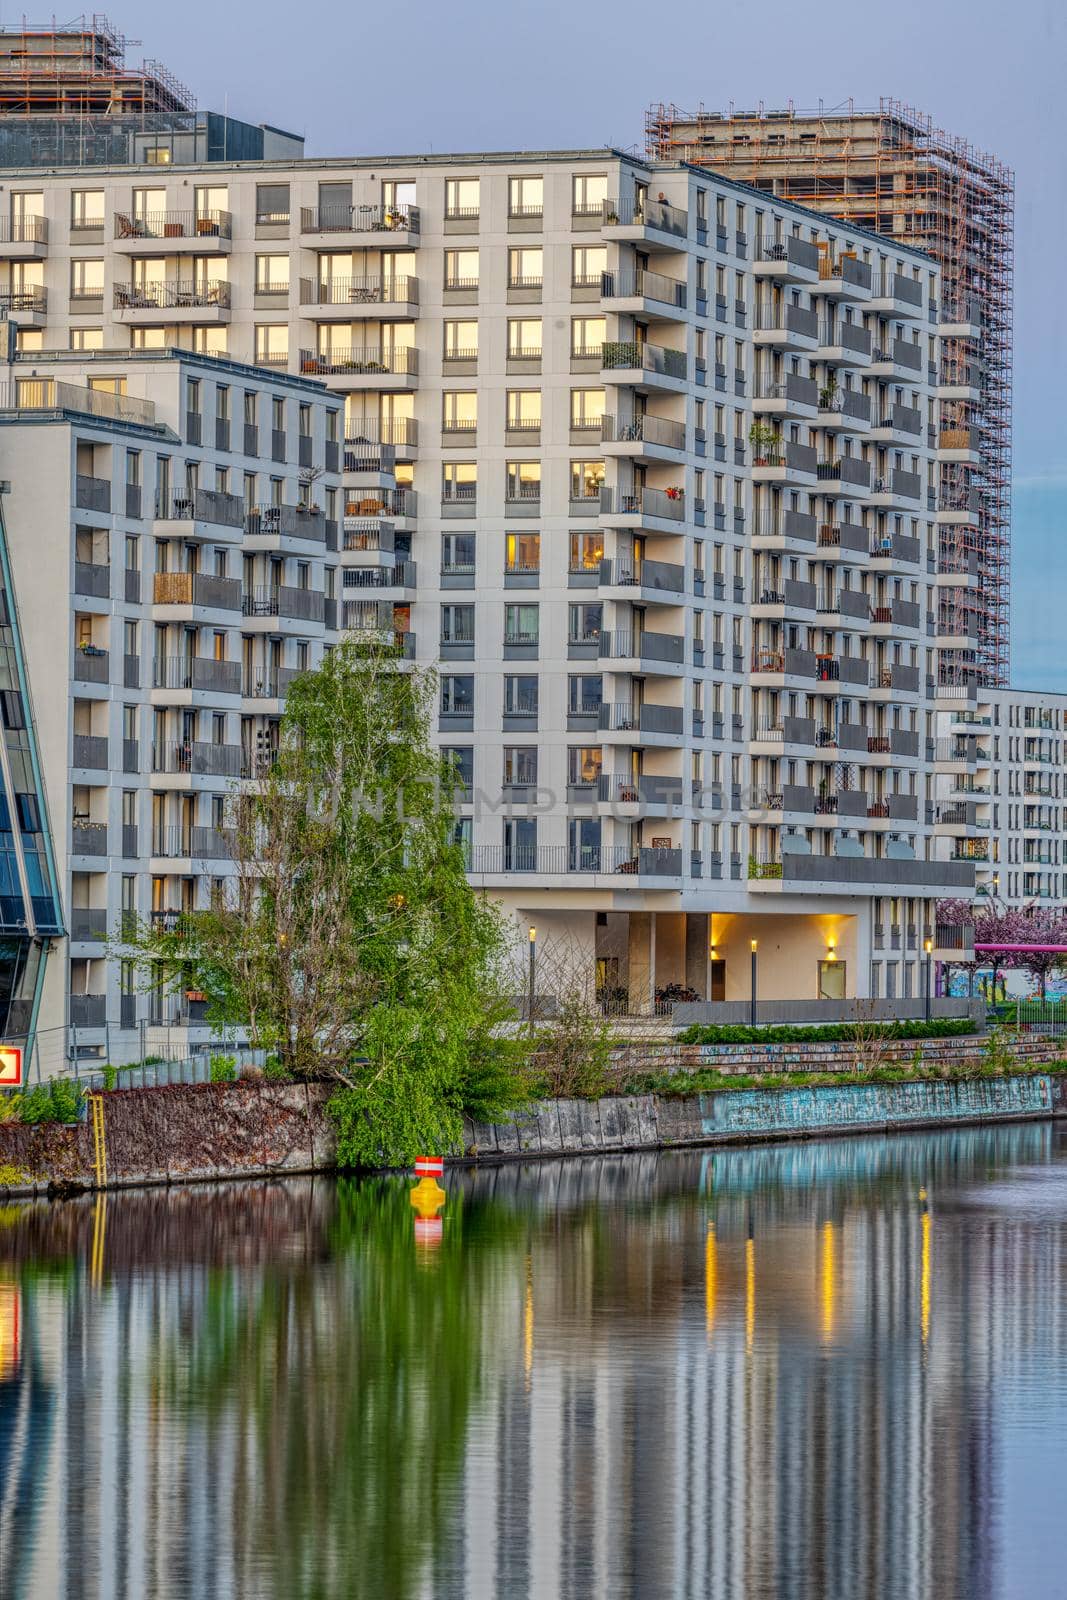 Big modern apartment building at the river Spree in Berlin, Germany